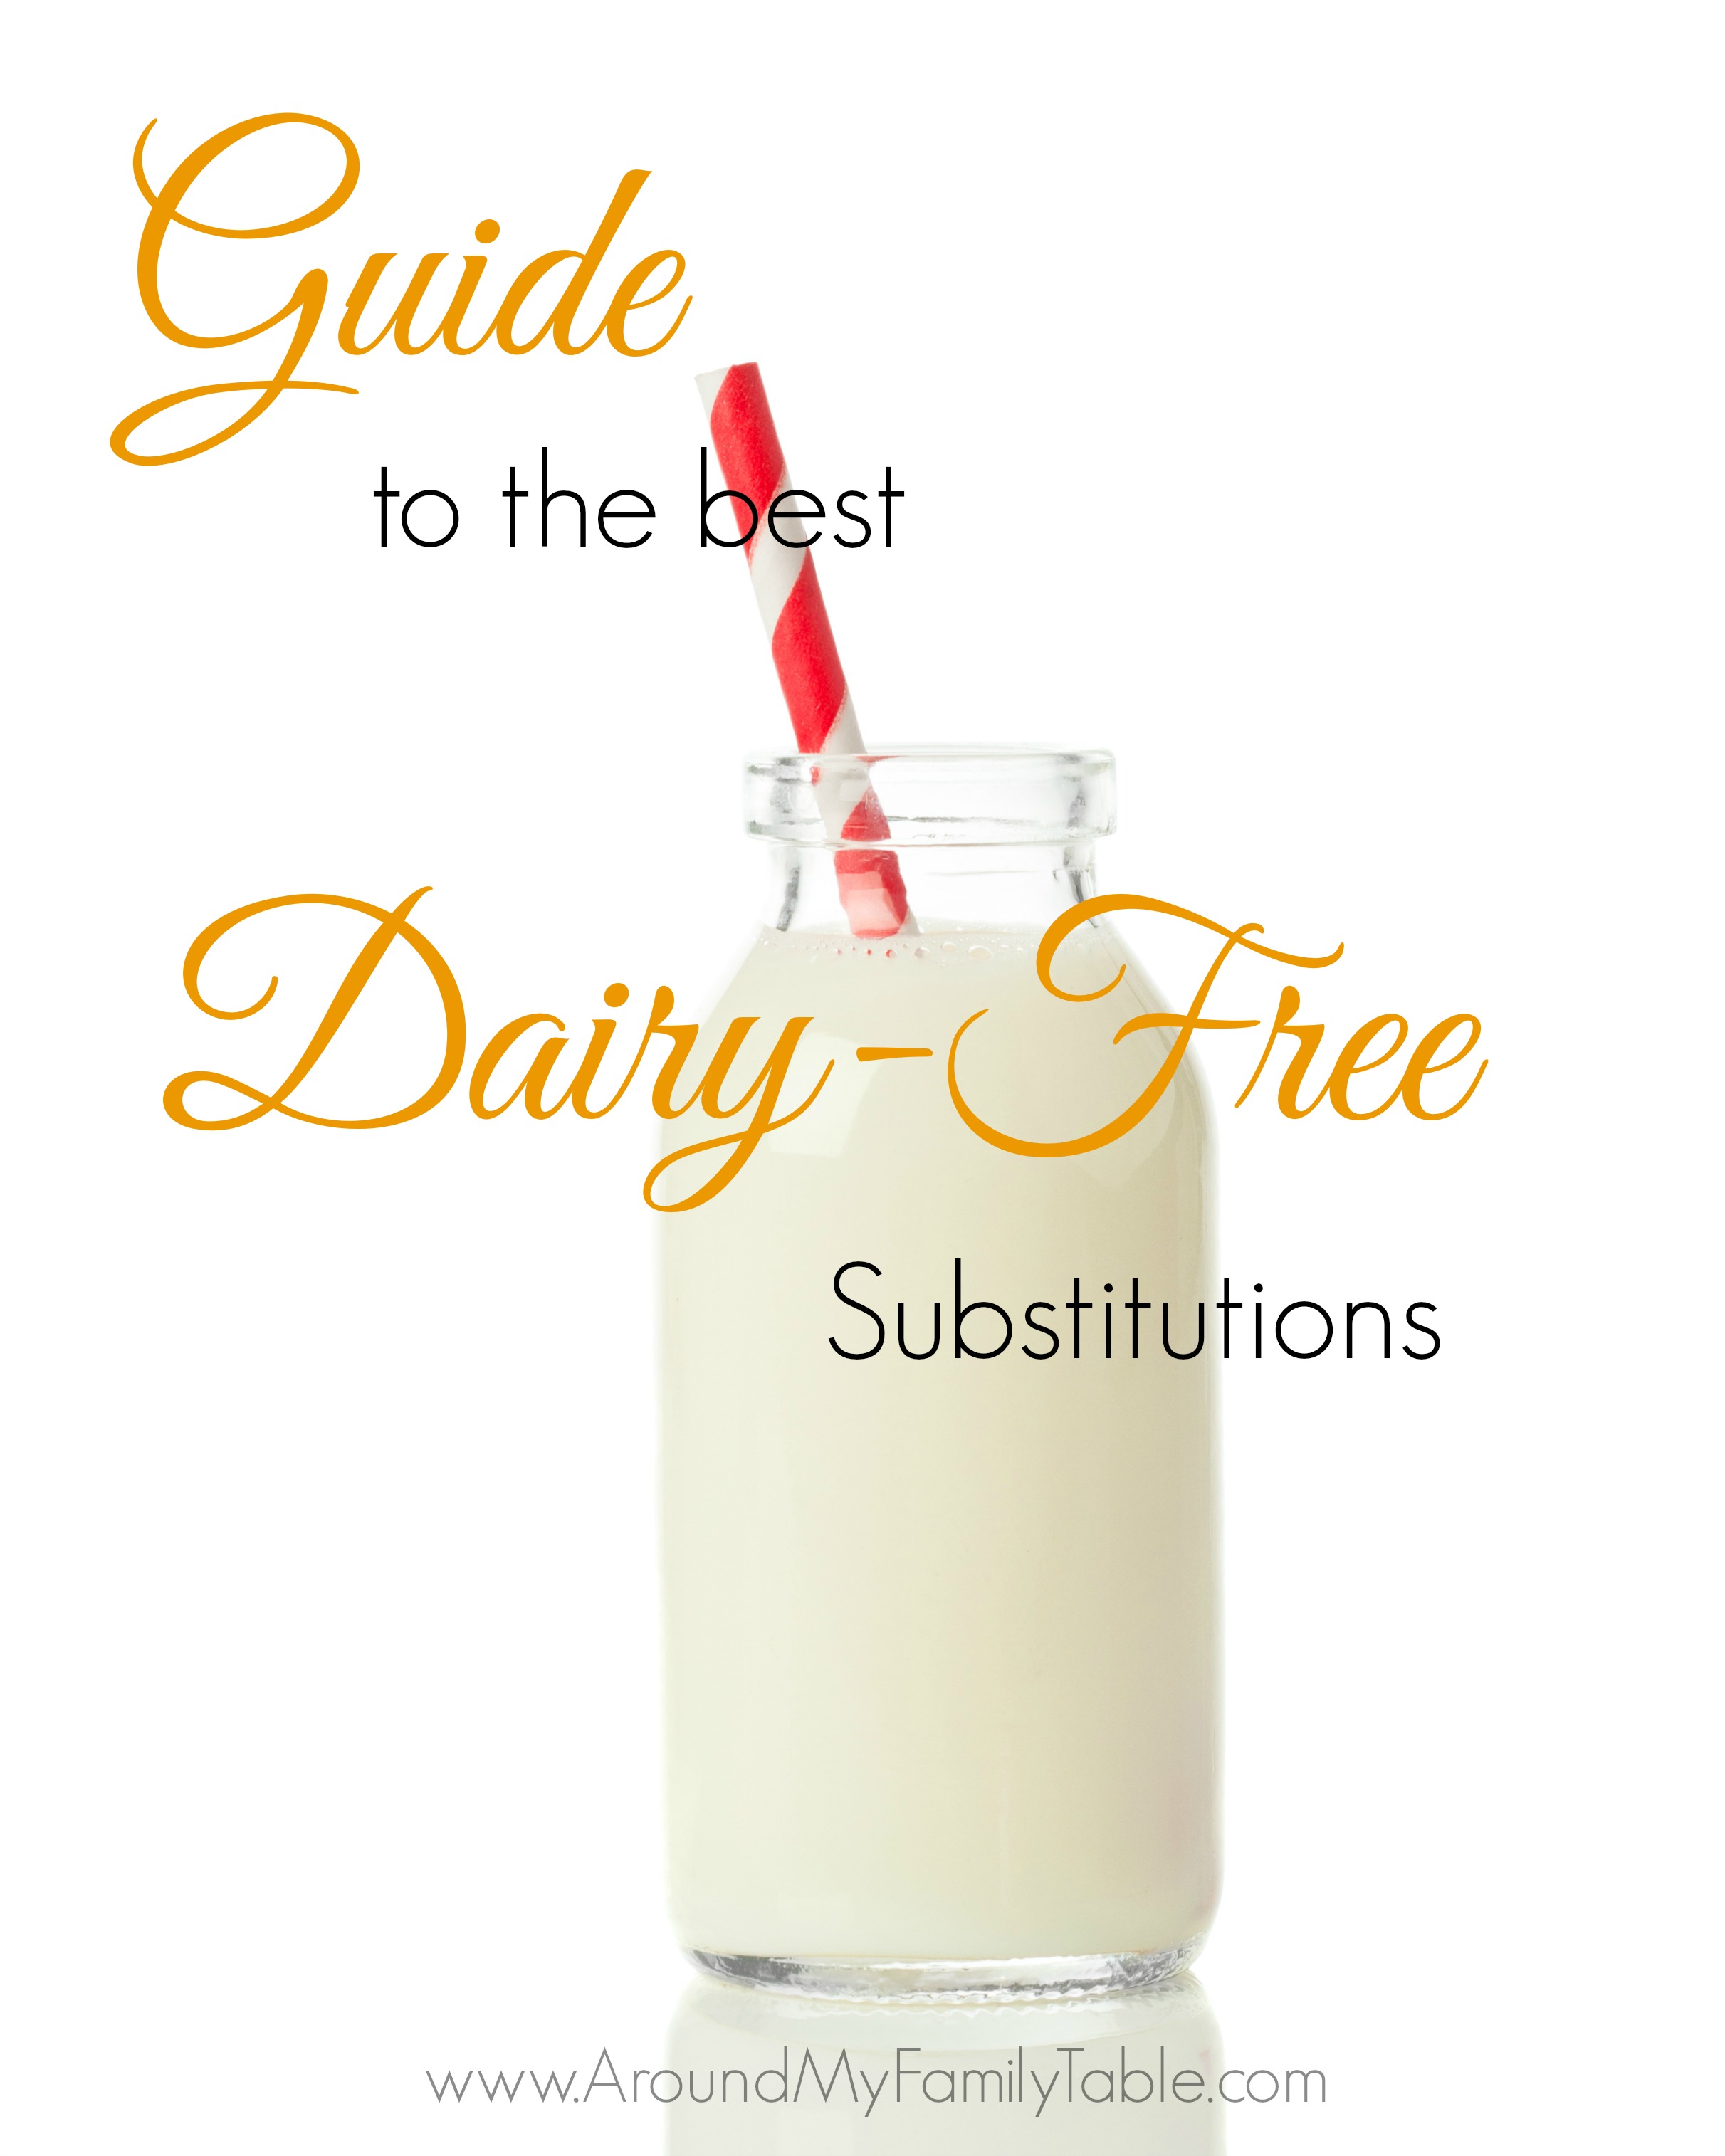 Guide to the best Dairy Free Substitutions